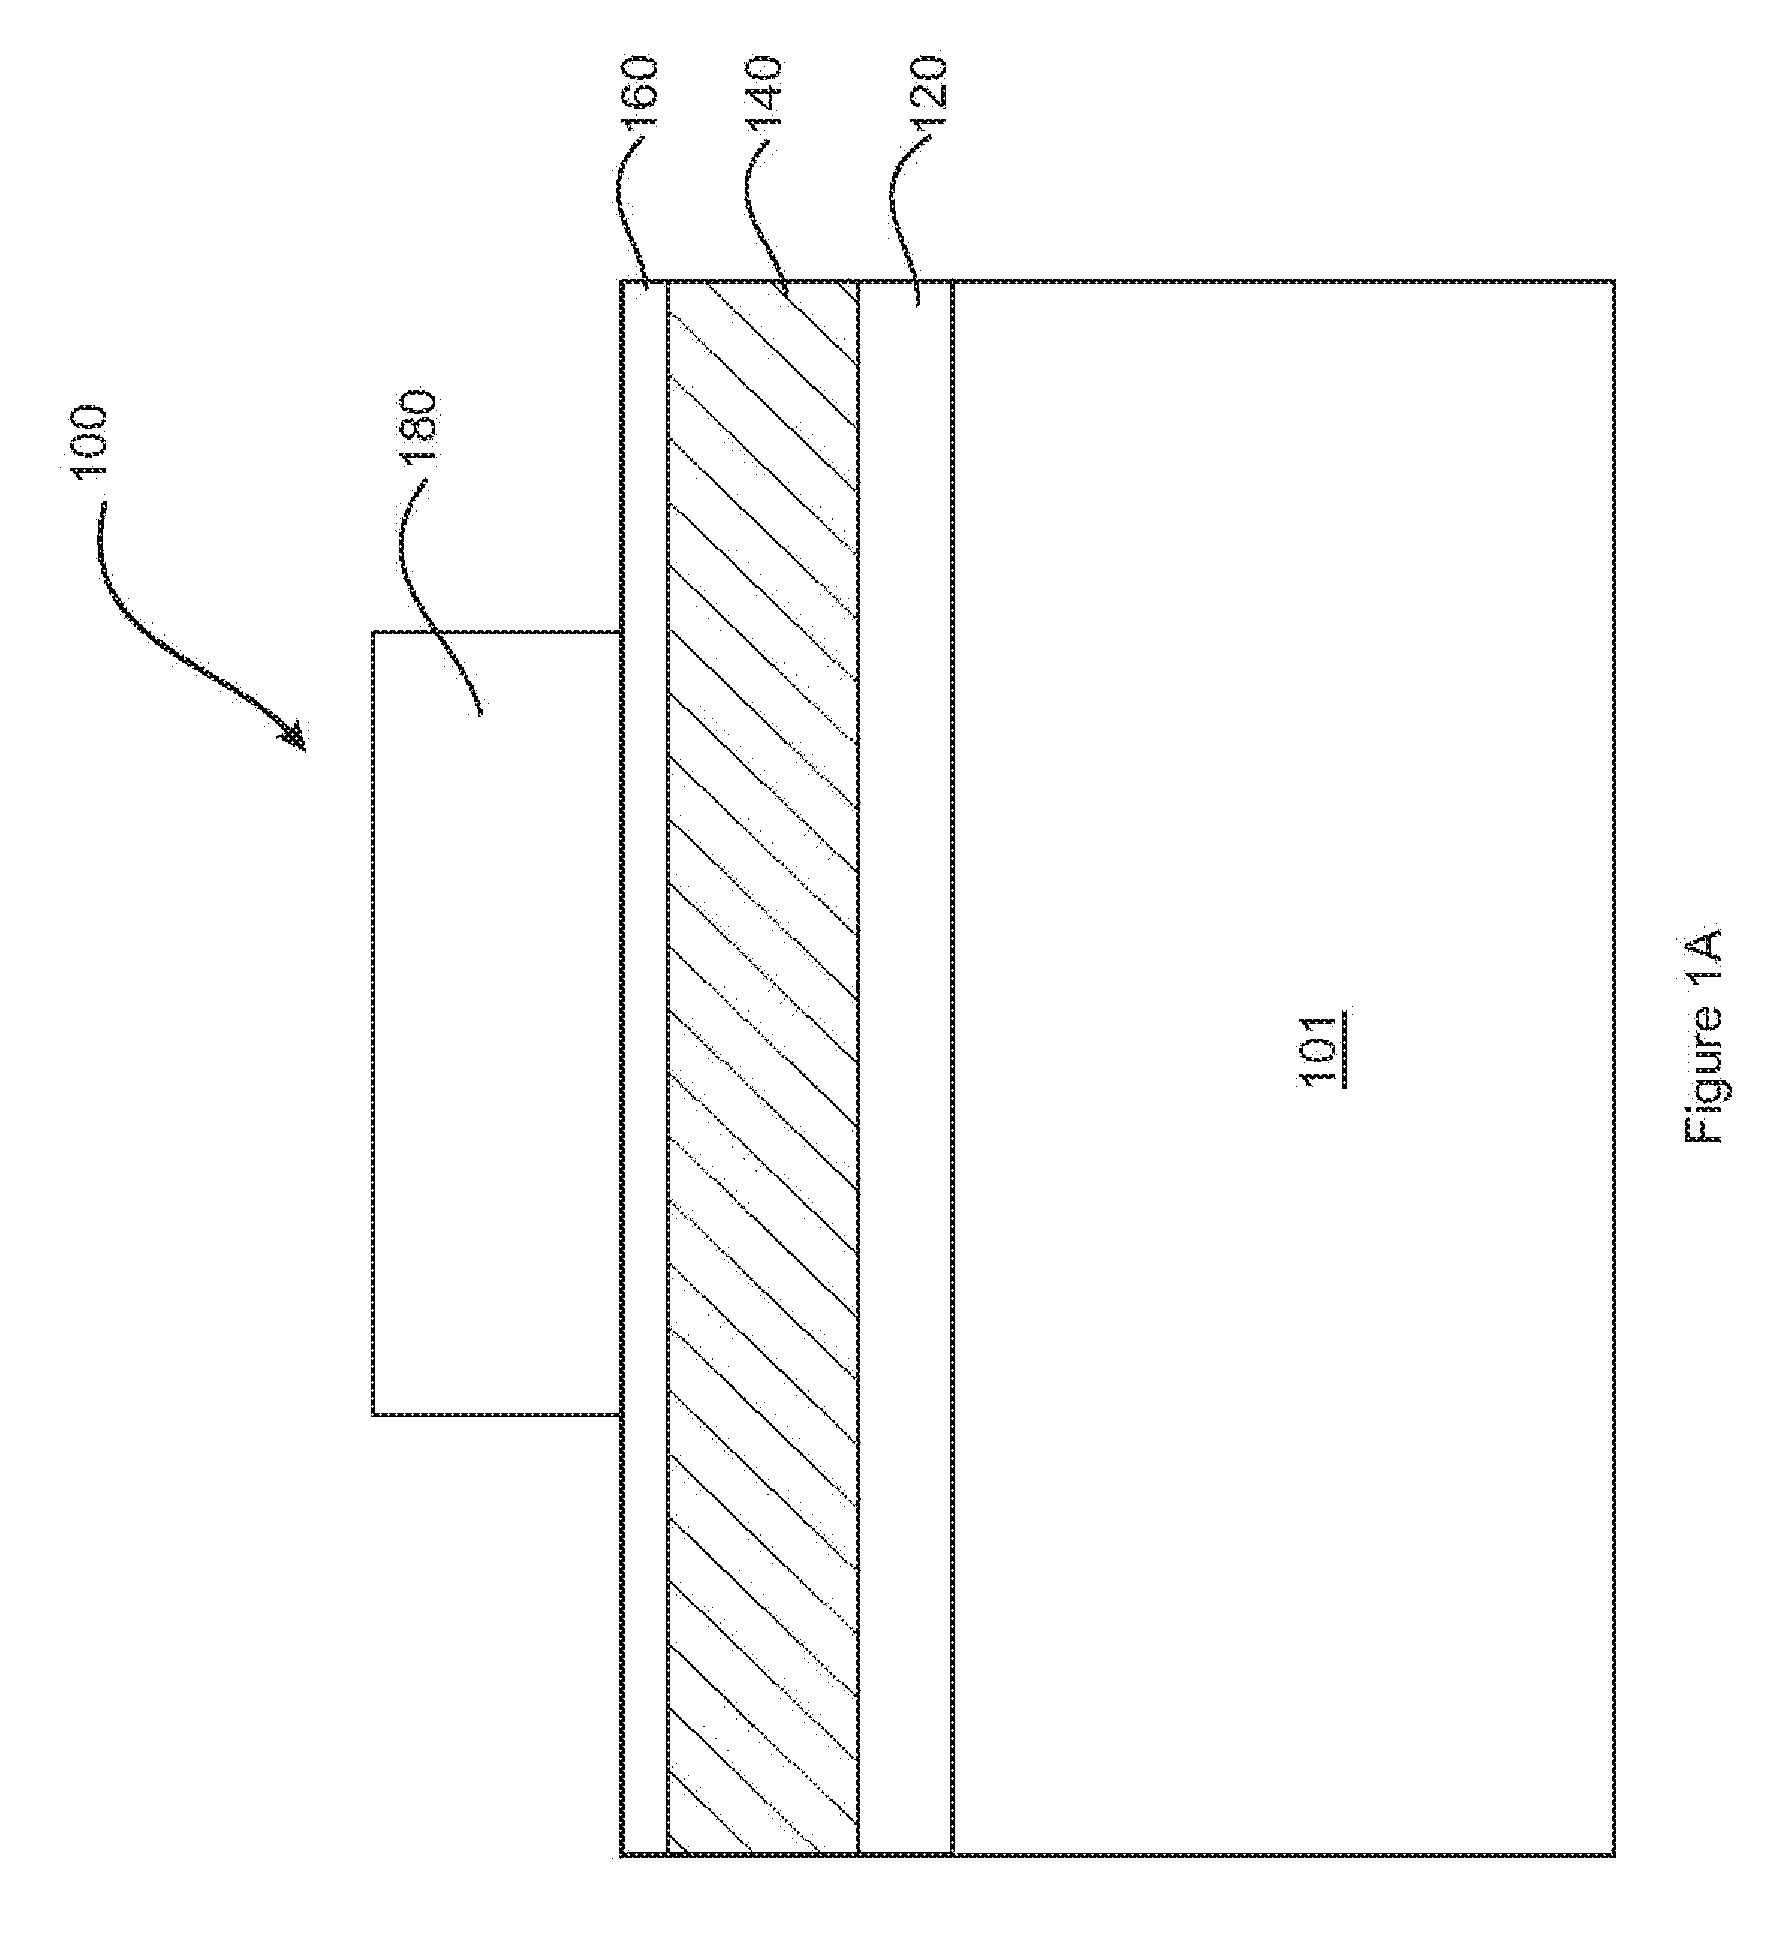 Method for reducing sidewall etch residue